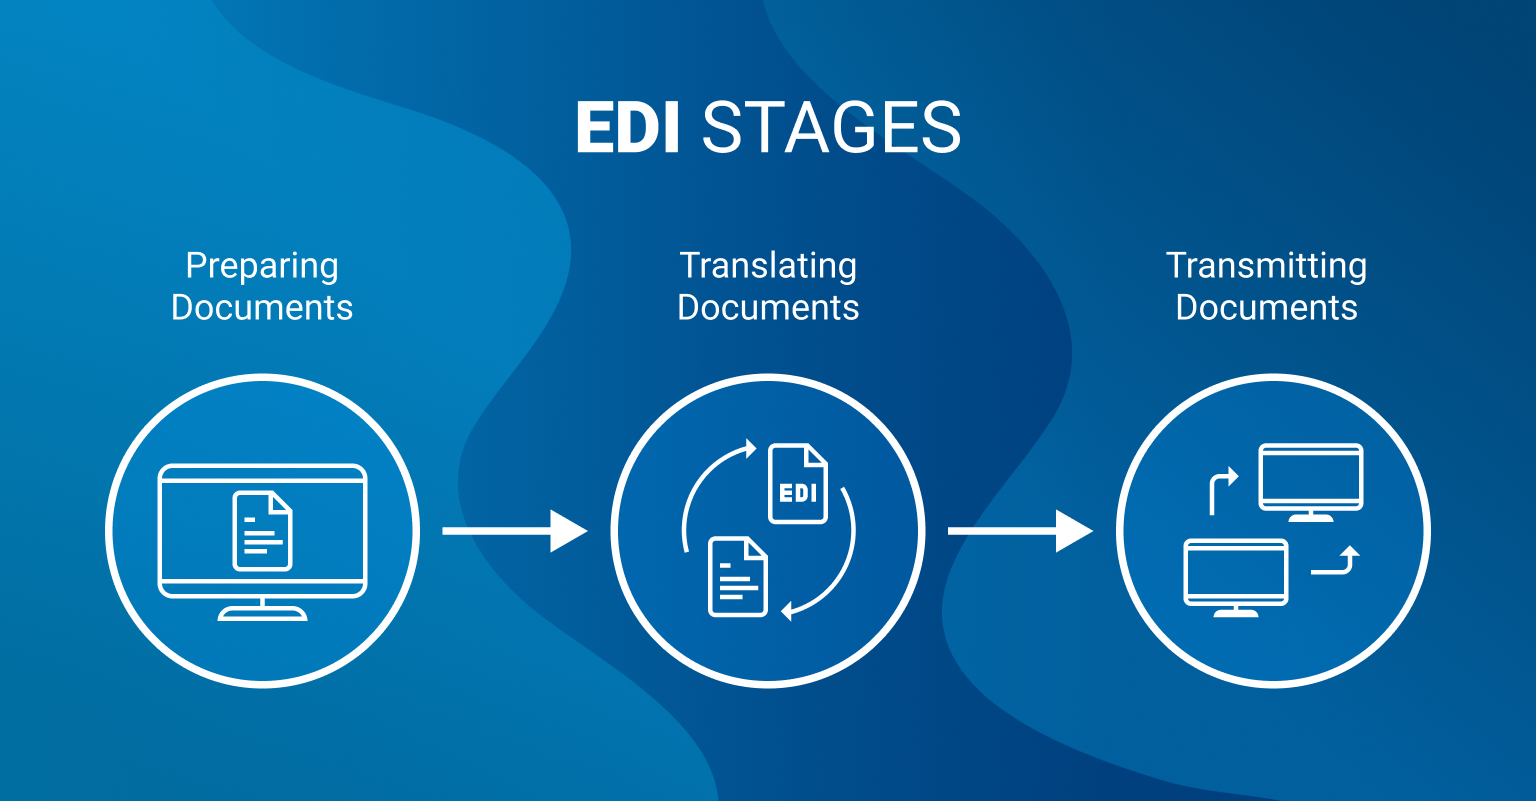 stages of electronic document interchange